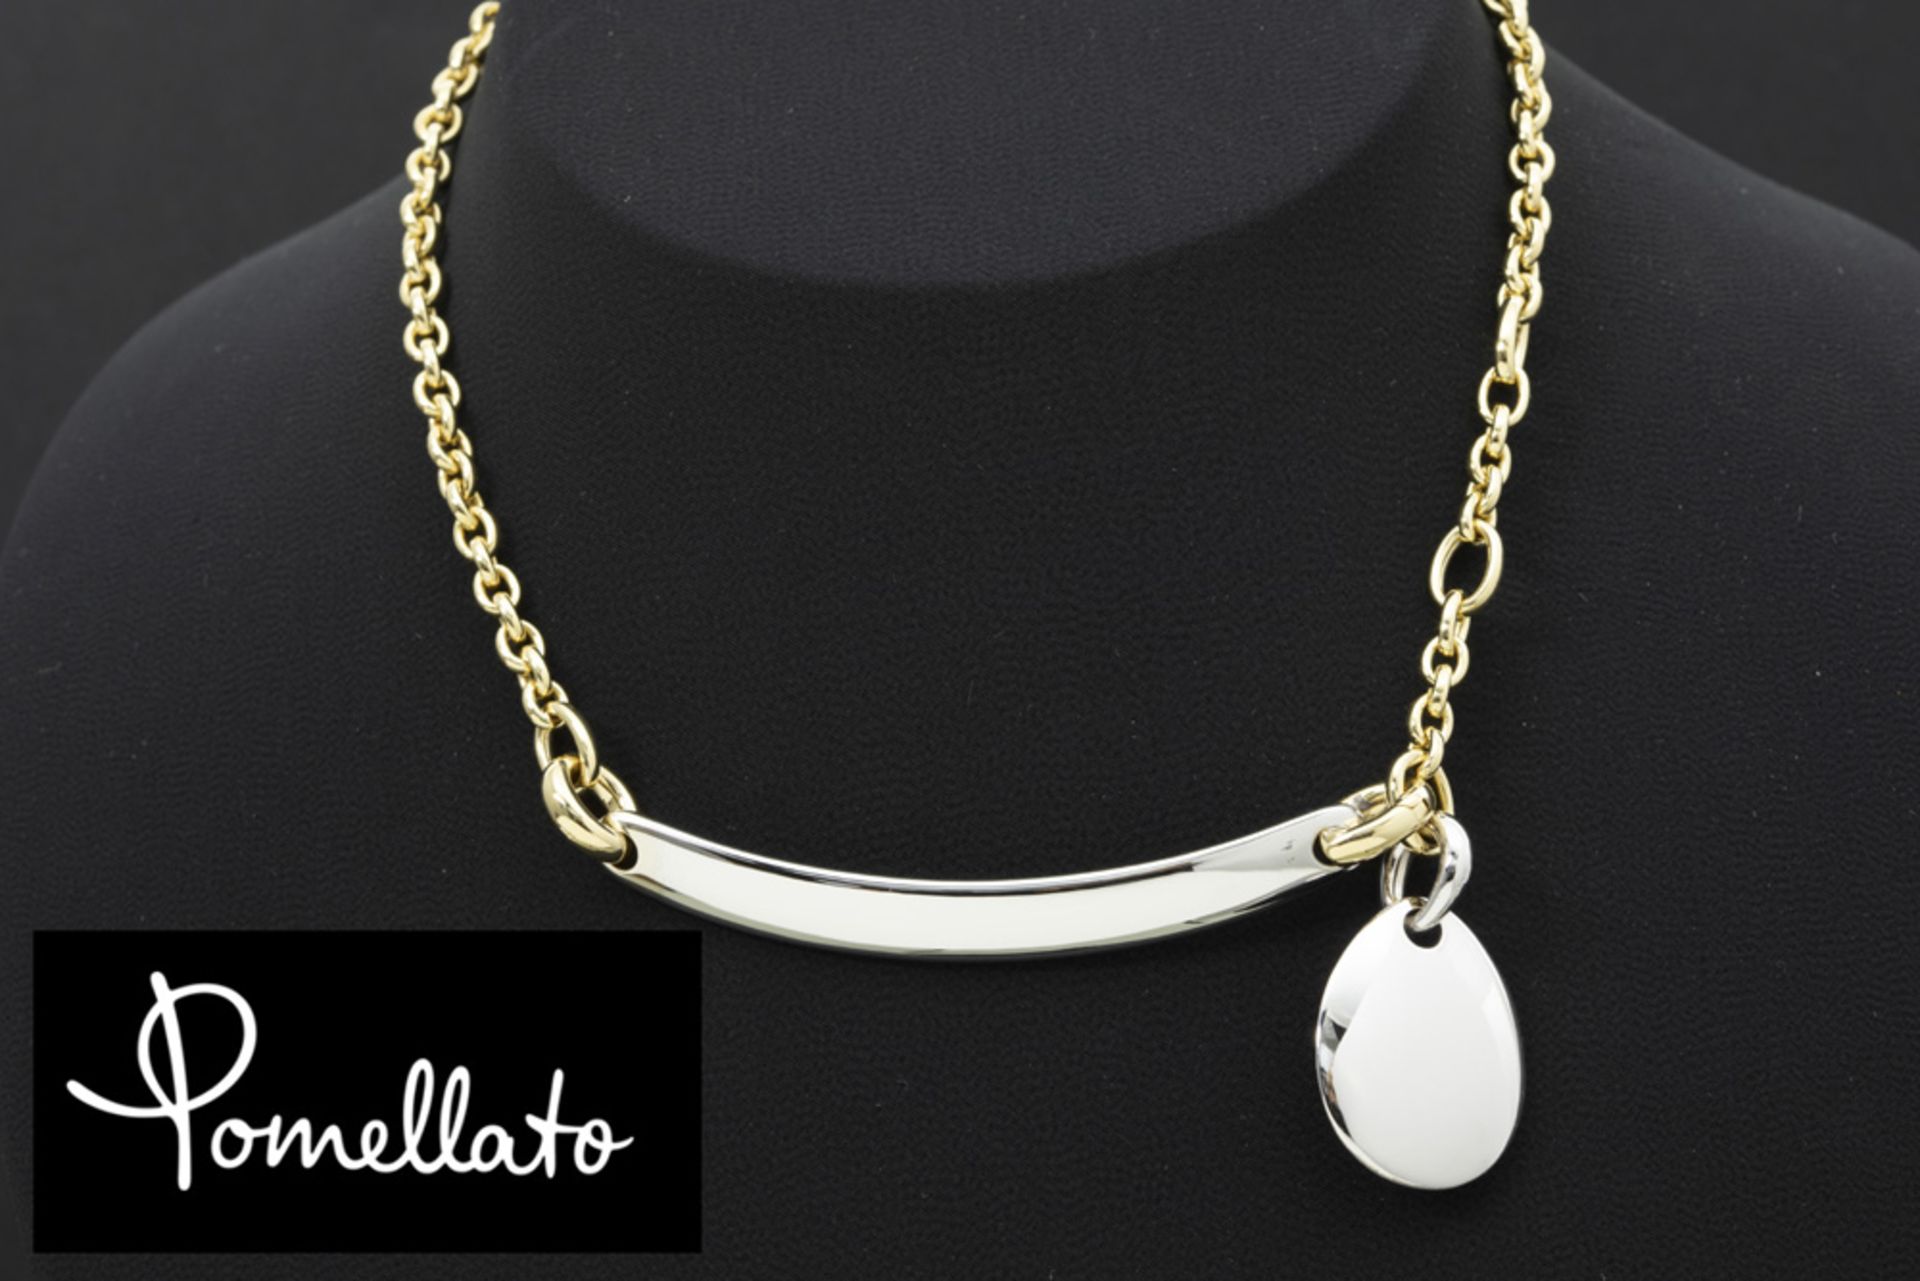 Pomellato signed necklace in yellow and white gold (18 carat) - with its origial round box ||